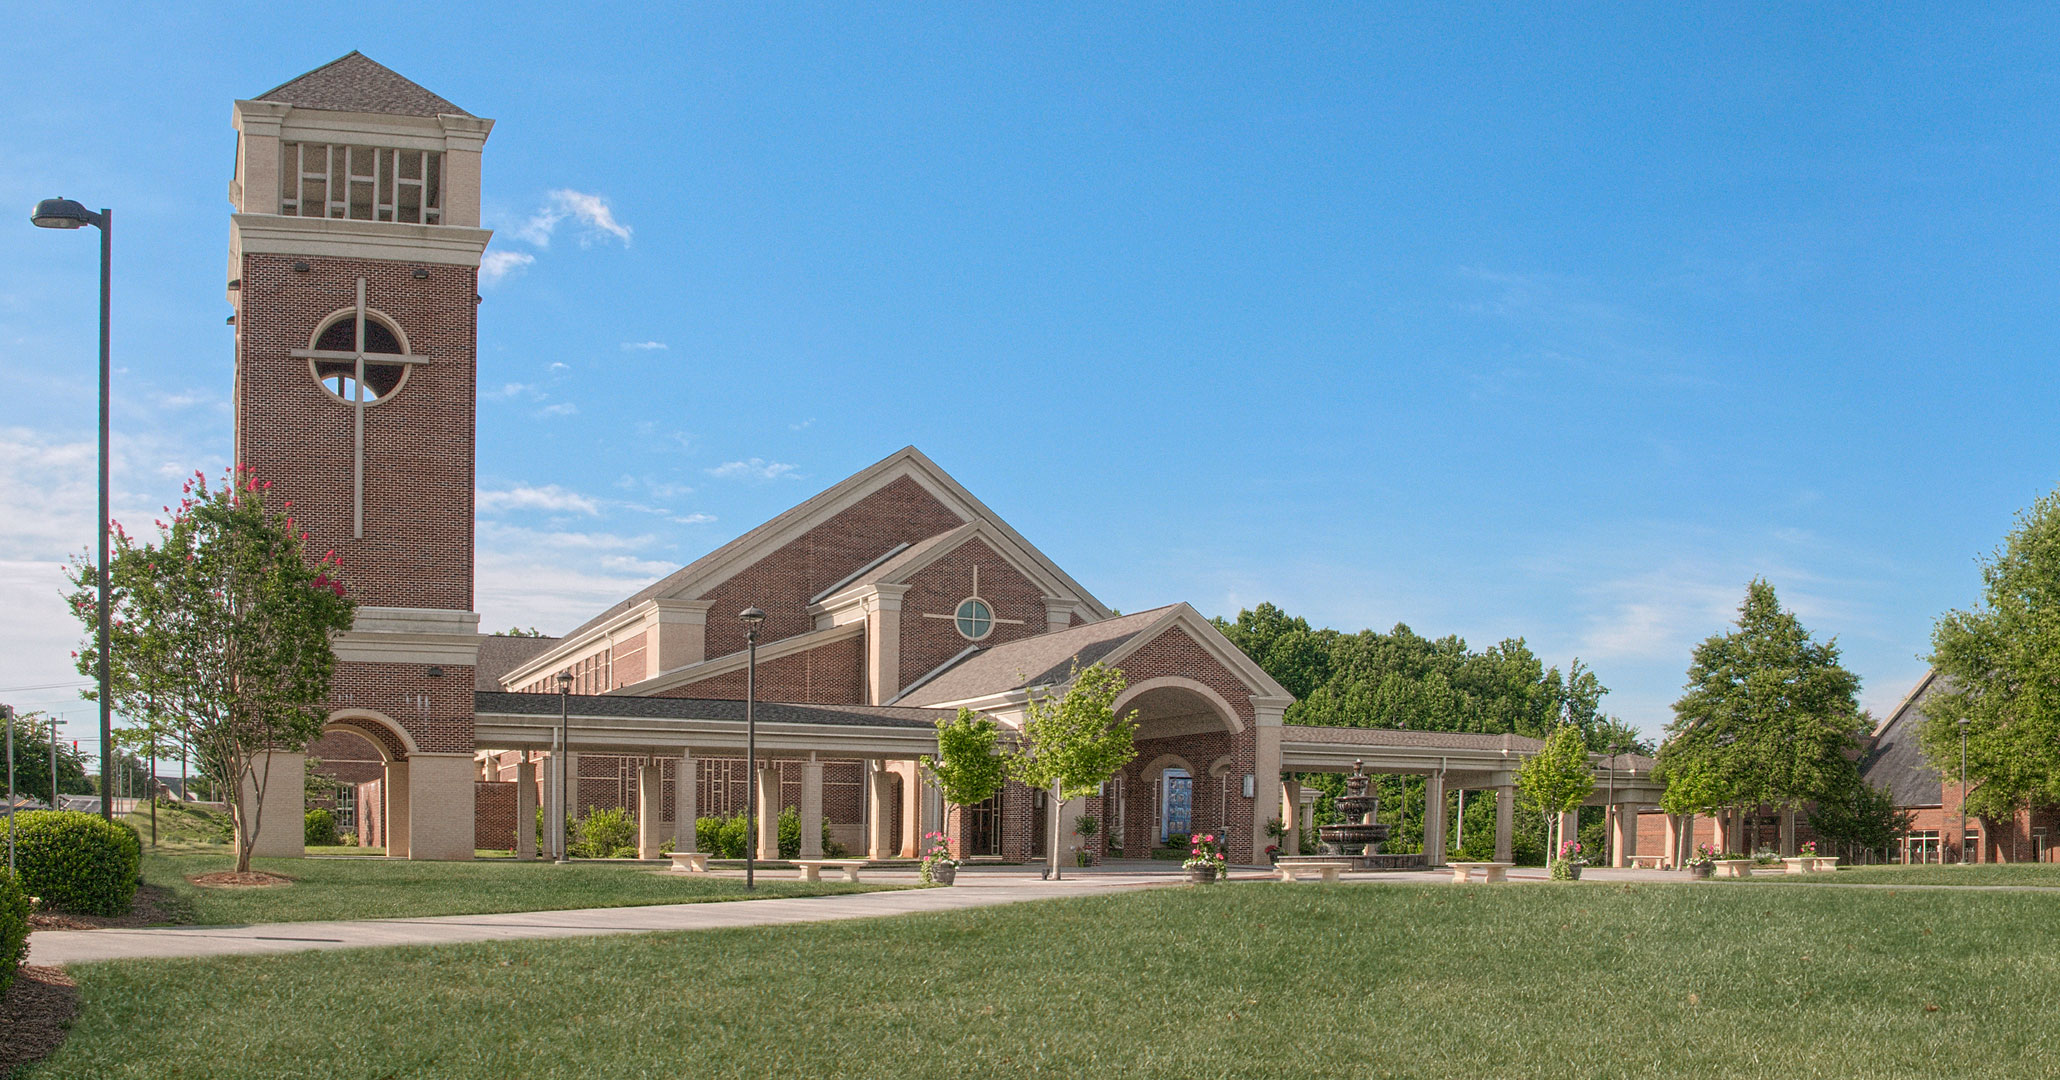 Boudreaux architects worked with St. Mark Catholic Church to design a new church.